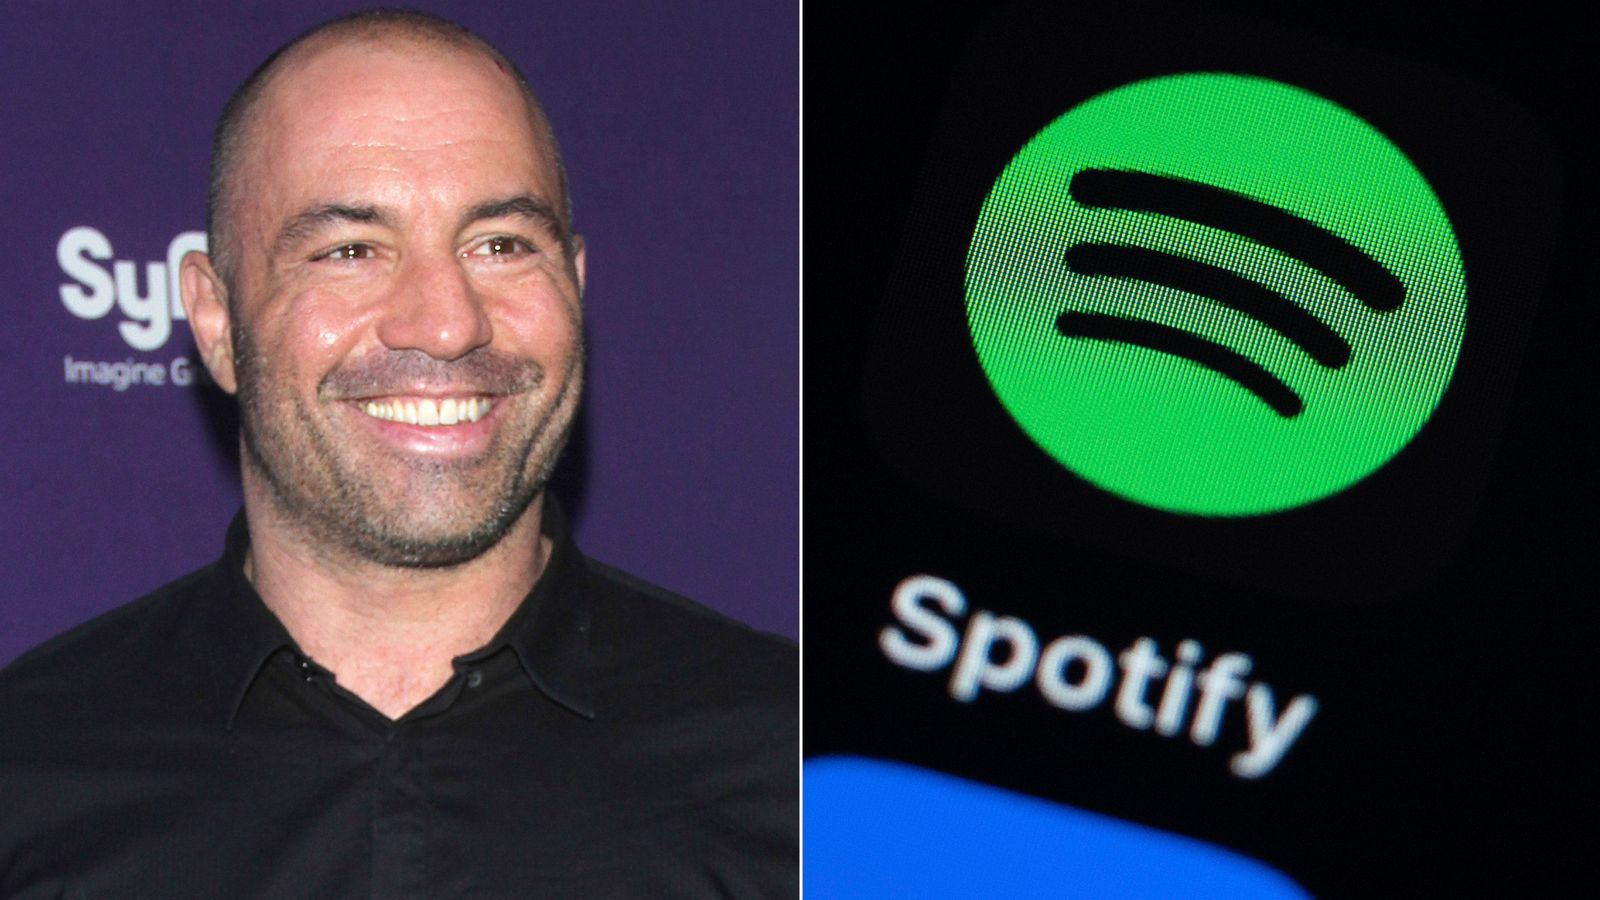 The Media Outlets Demanding Joe Rogan's Removal from Spotify Spread Far More Disinformation